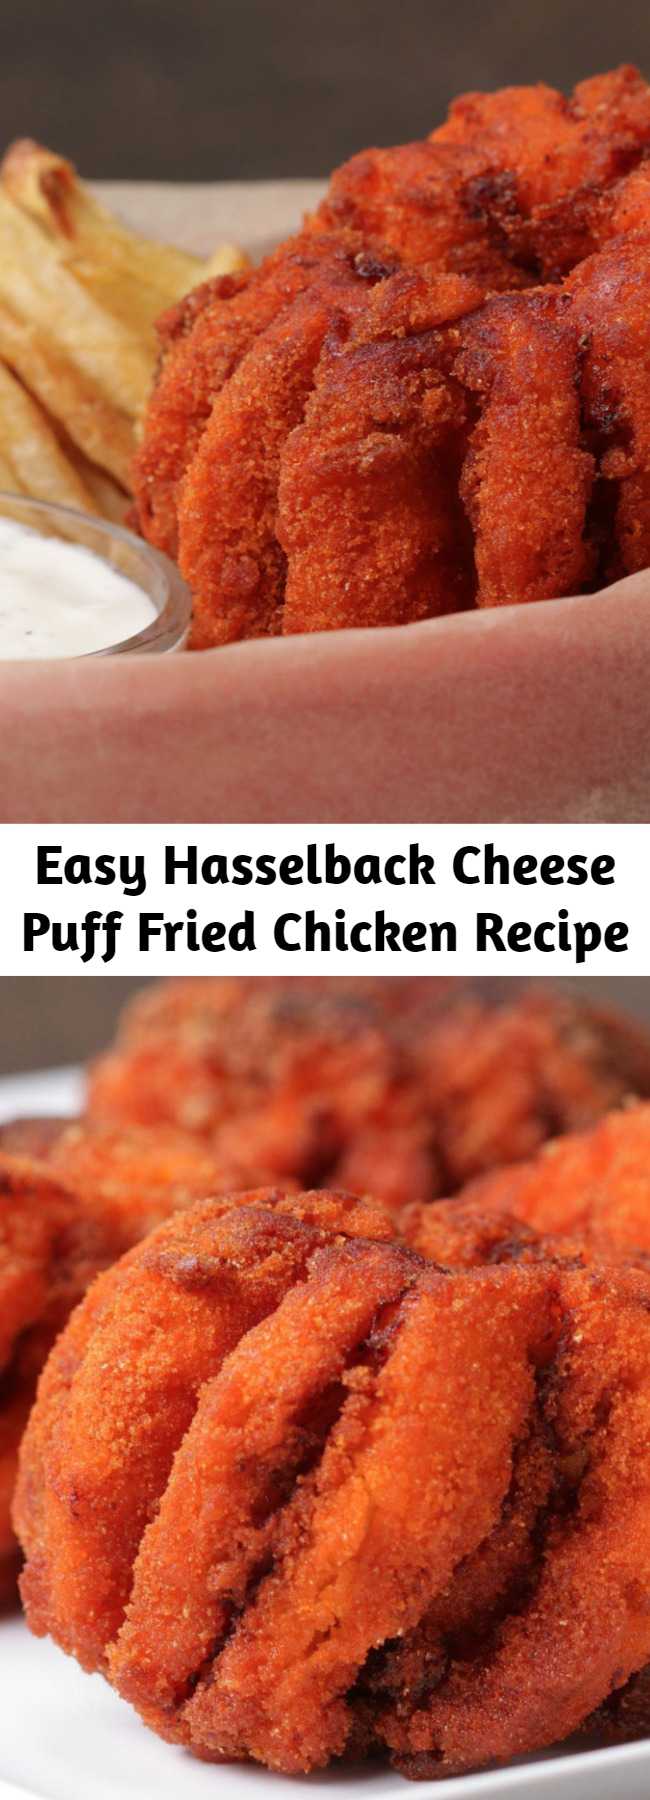 Easy Hasselback Cheese Puff Fried Chicken Recipe